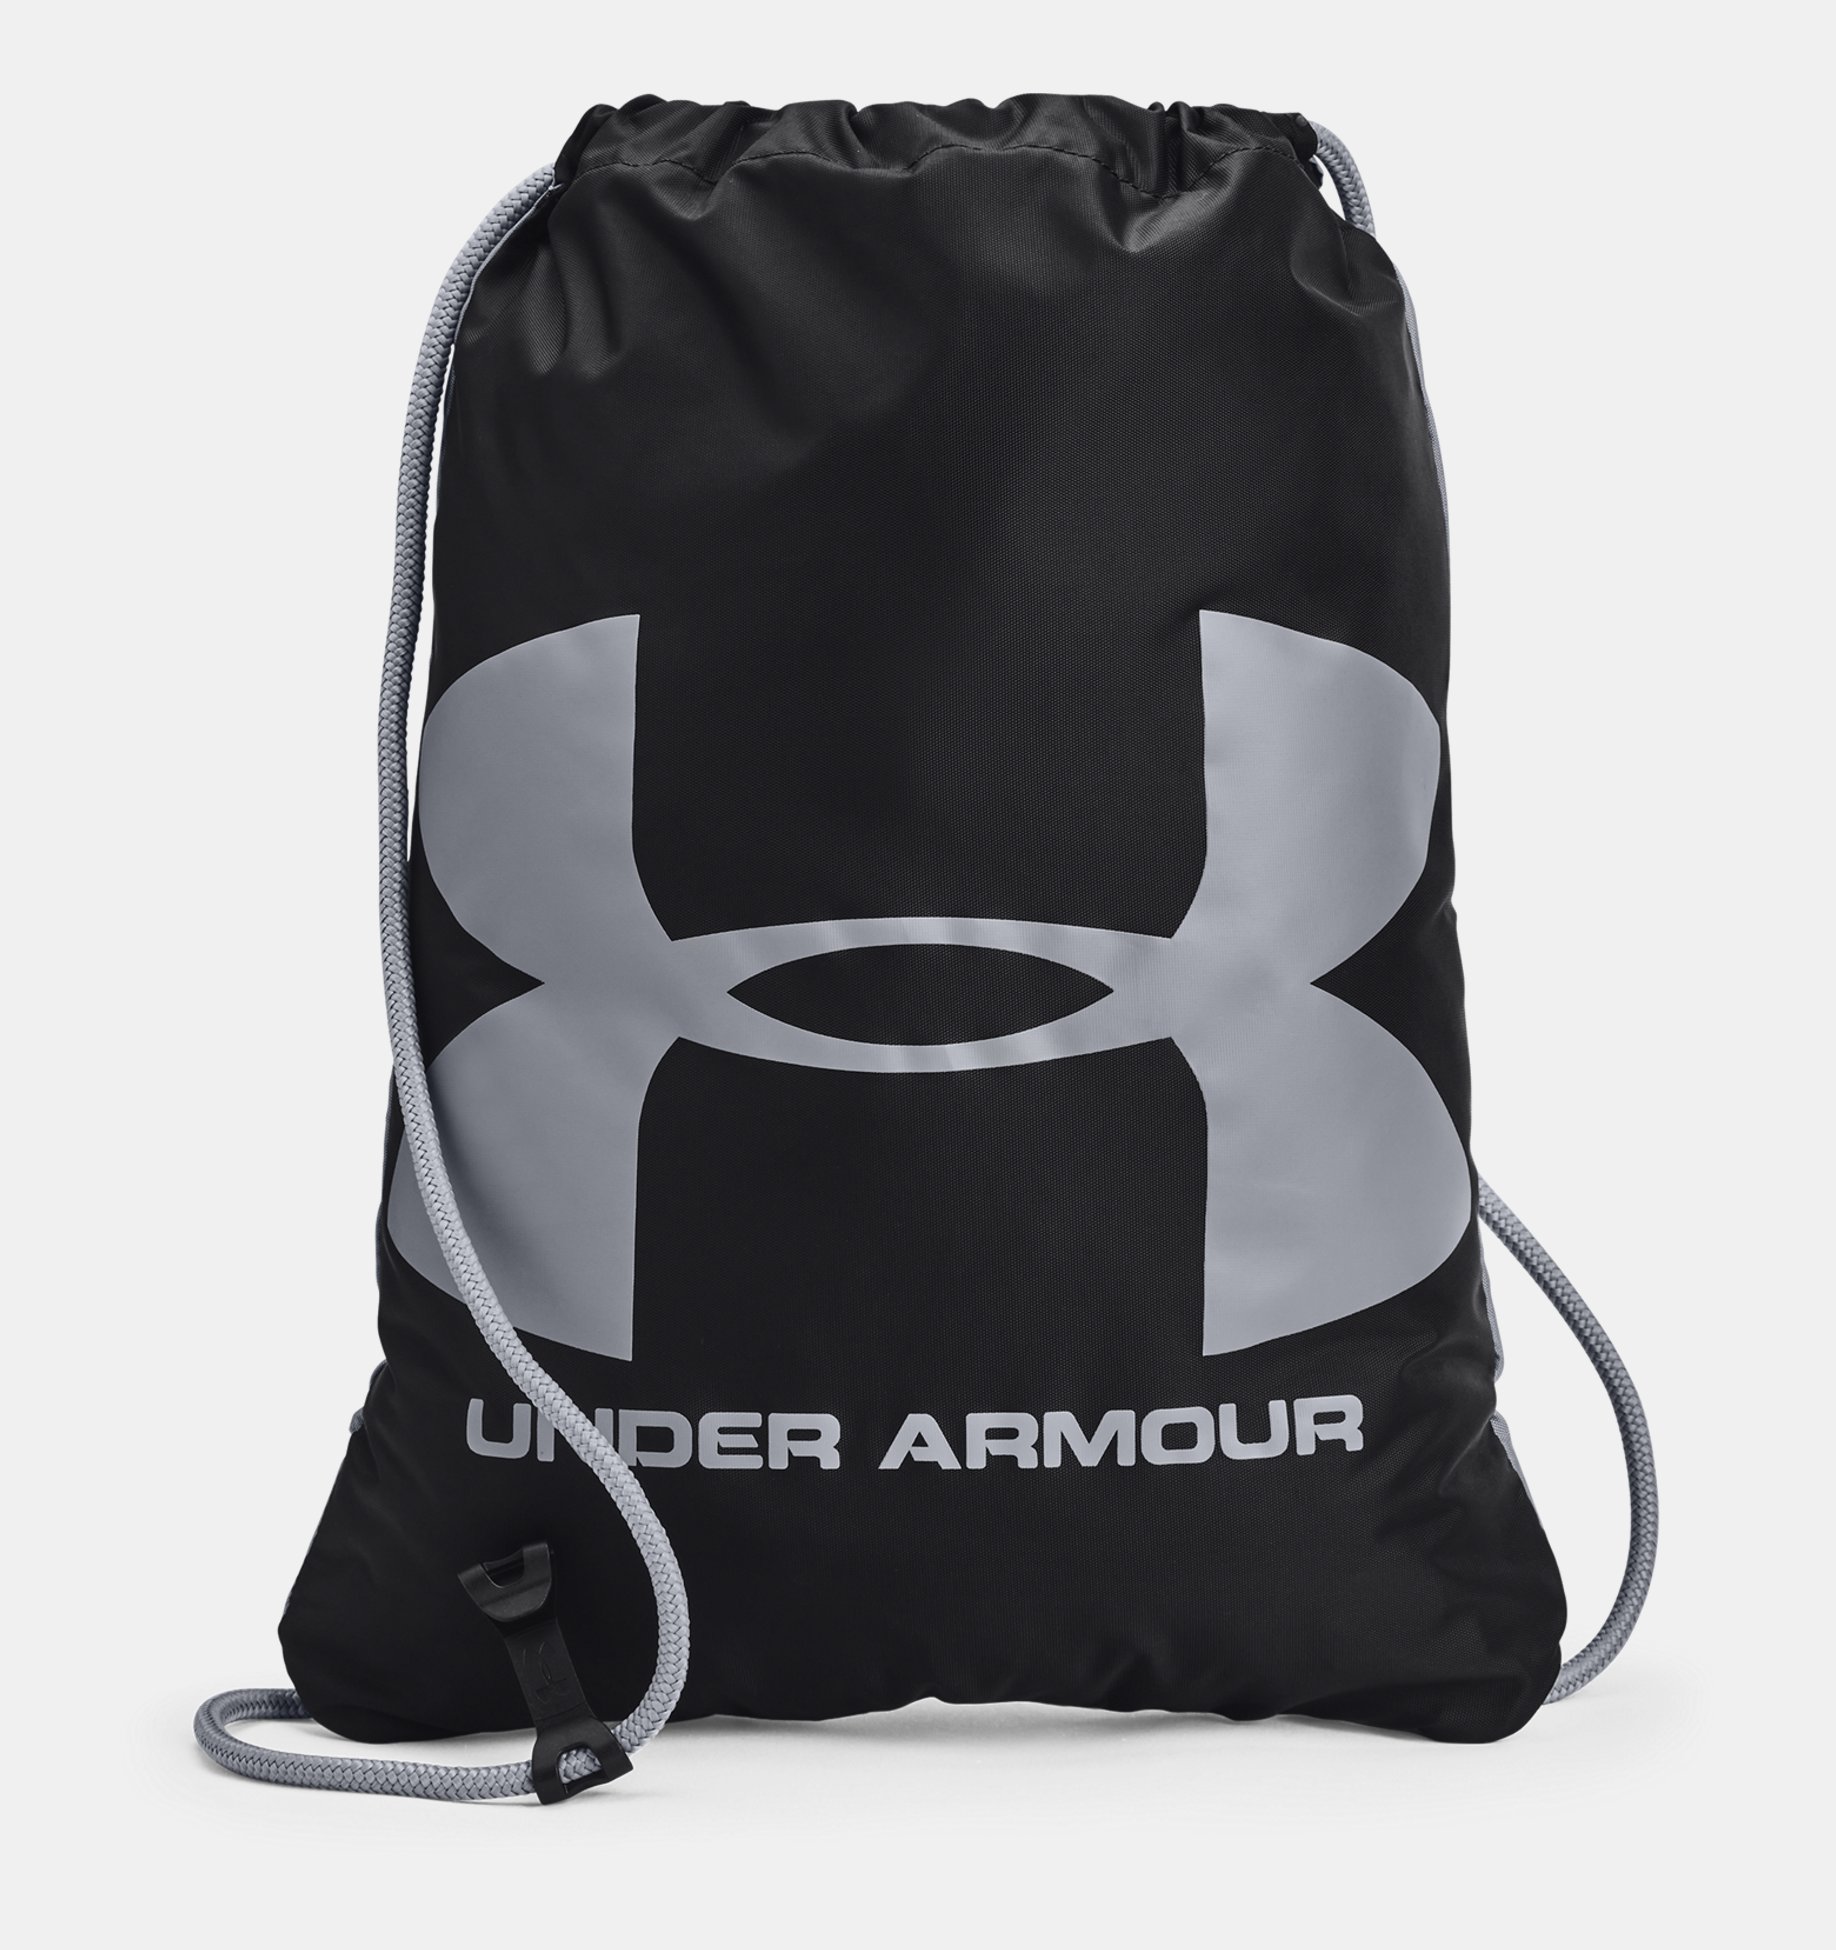 Under Armour Adult Ozsee Sackpack 